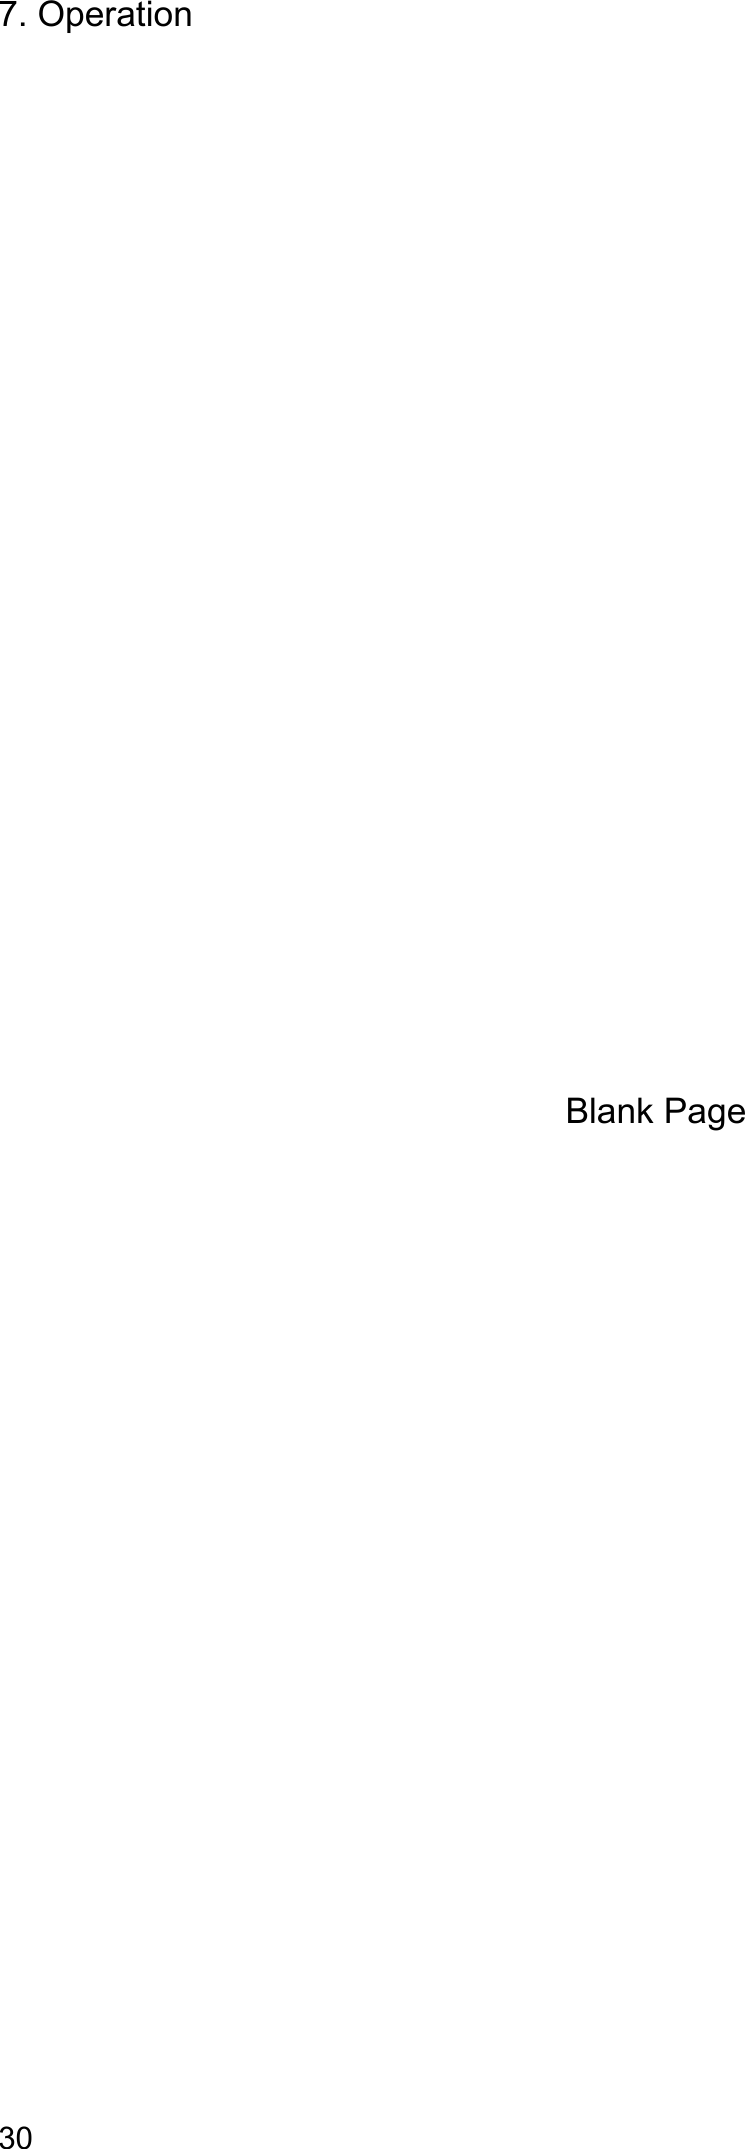 7. Operation 30                        Blank Page  